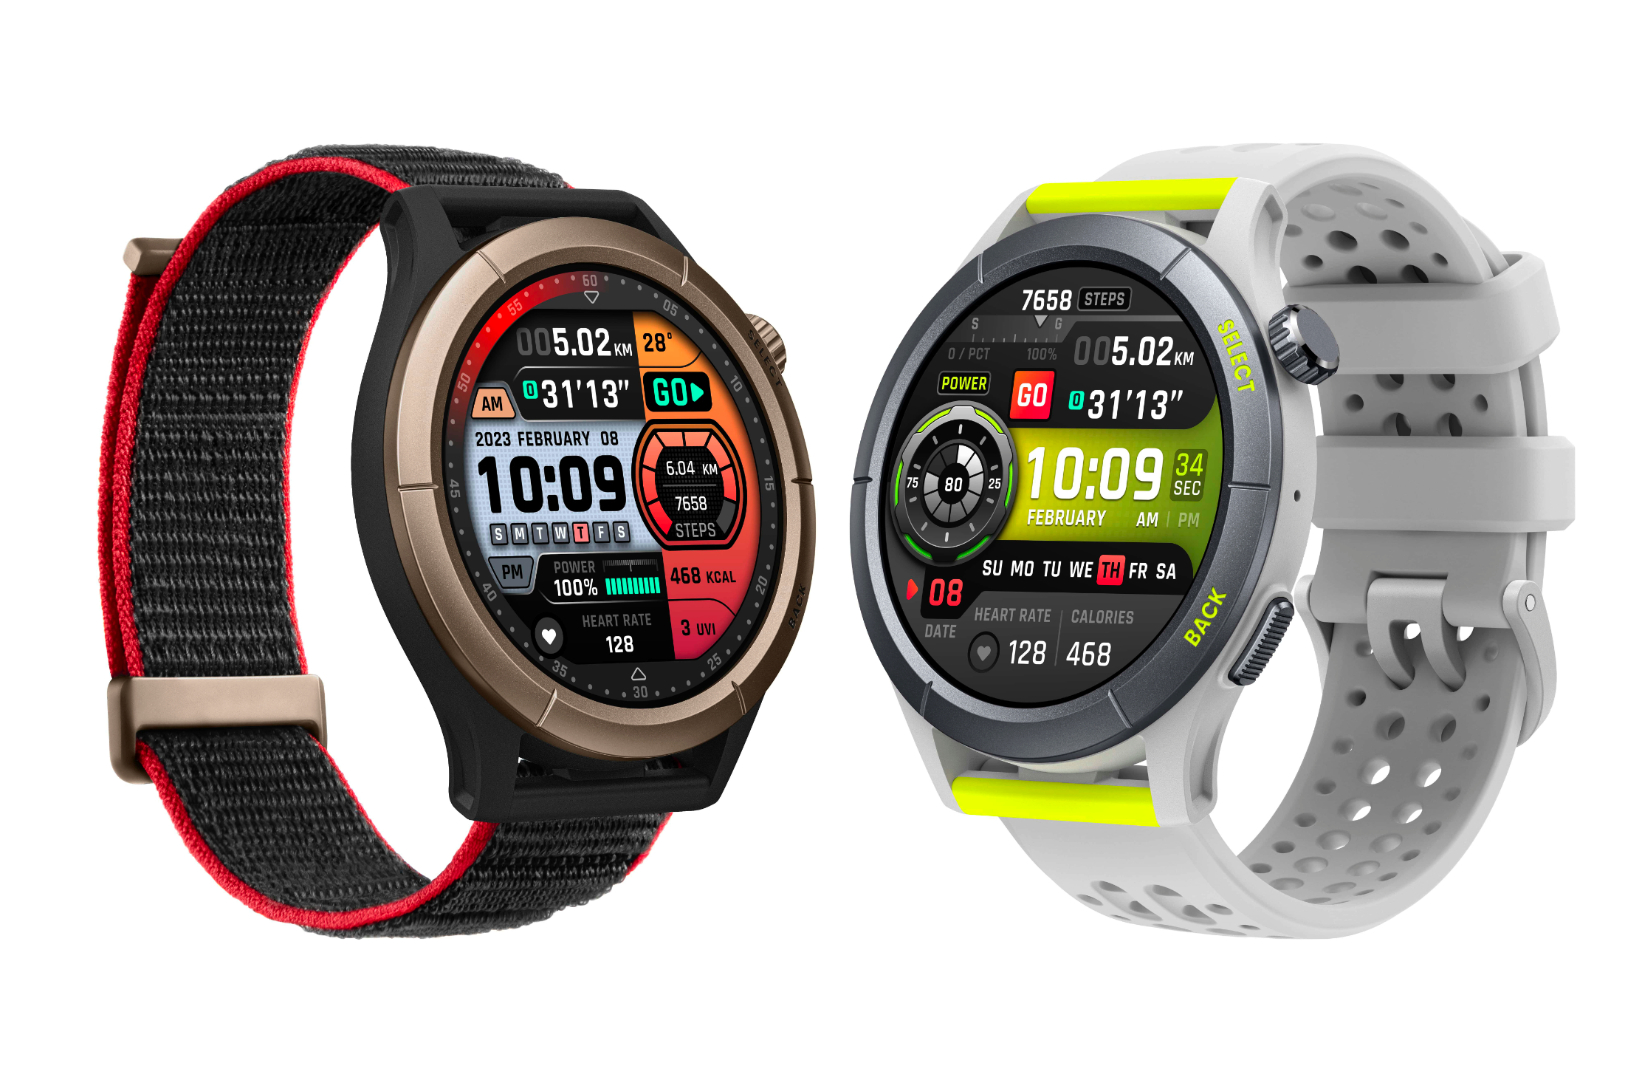 Amazfit Cheetah gets a new update bringing new functions to the smartwatch  - Gizmochina